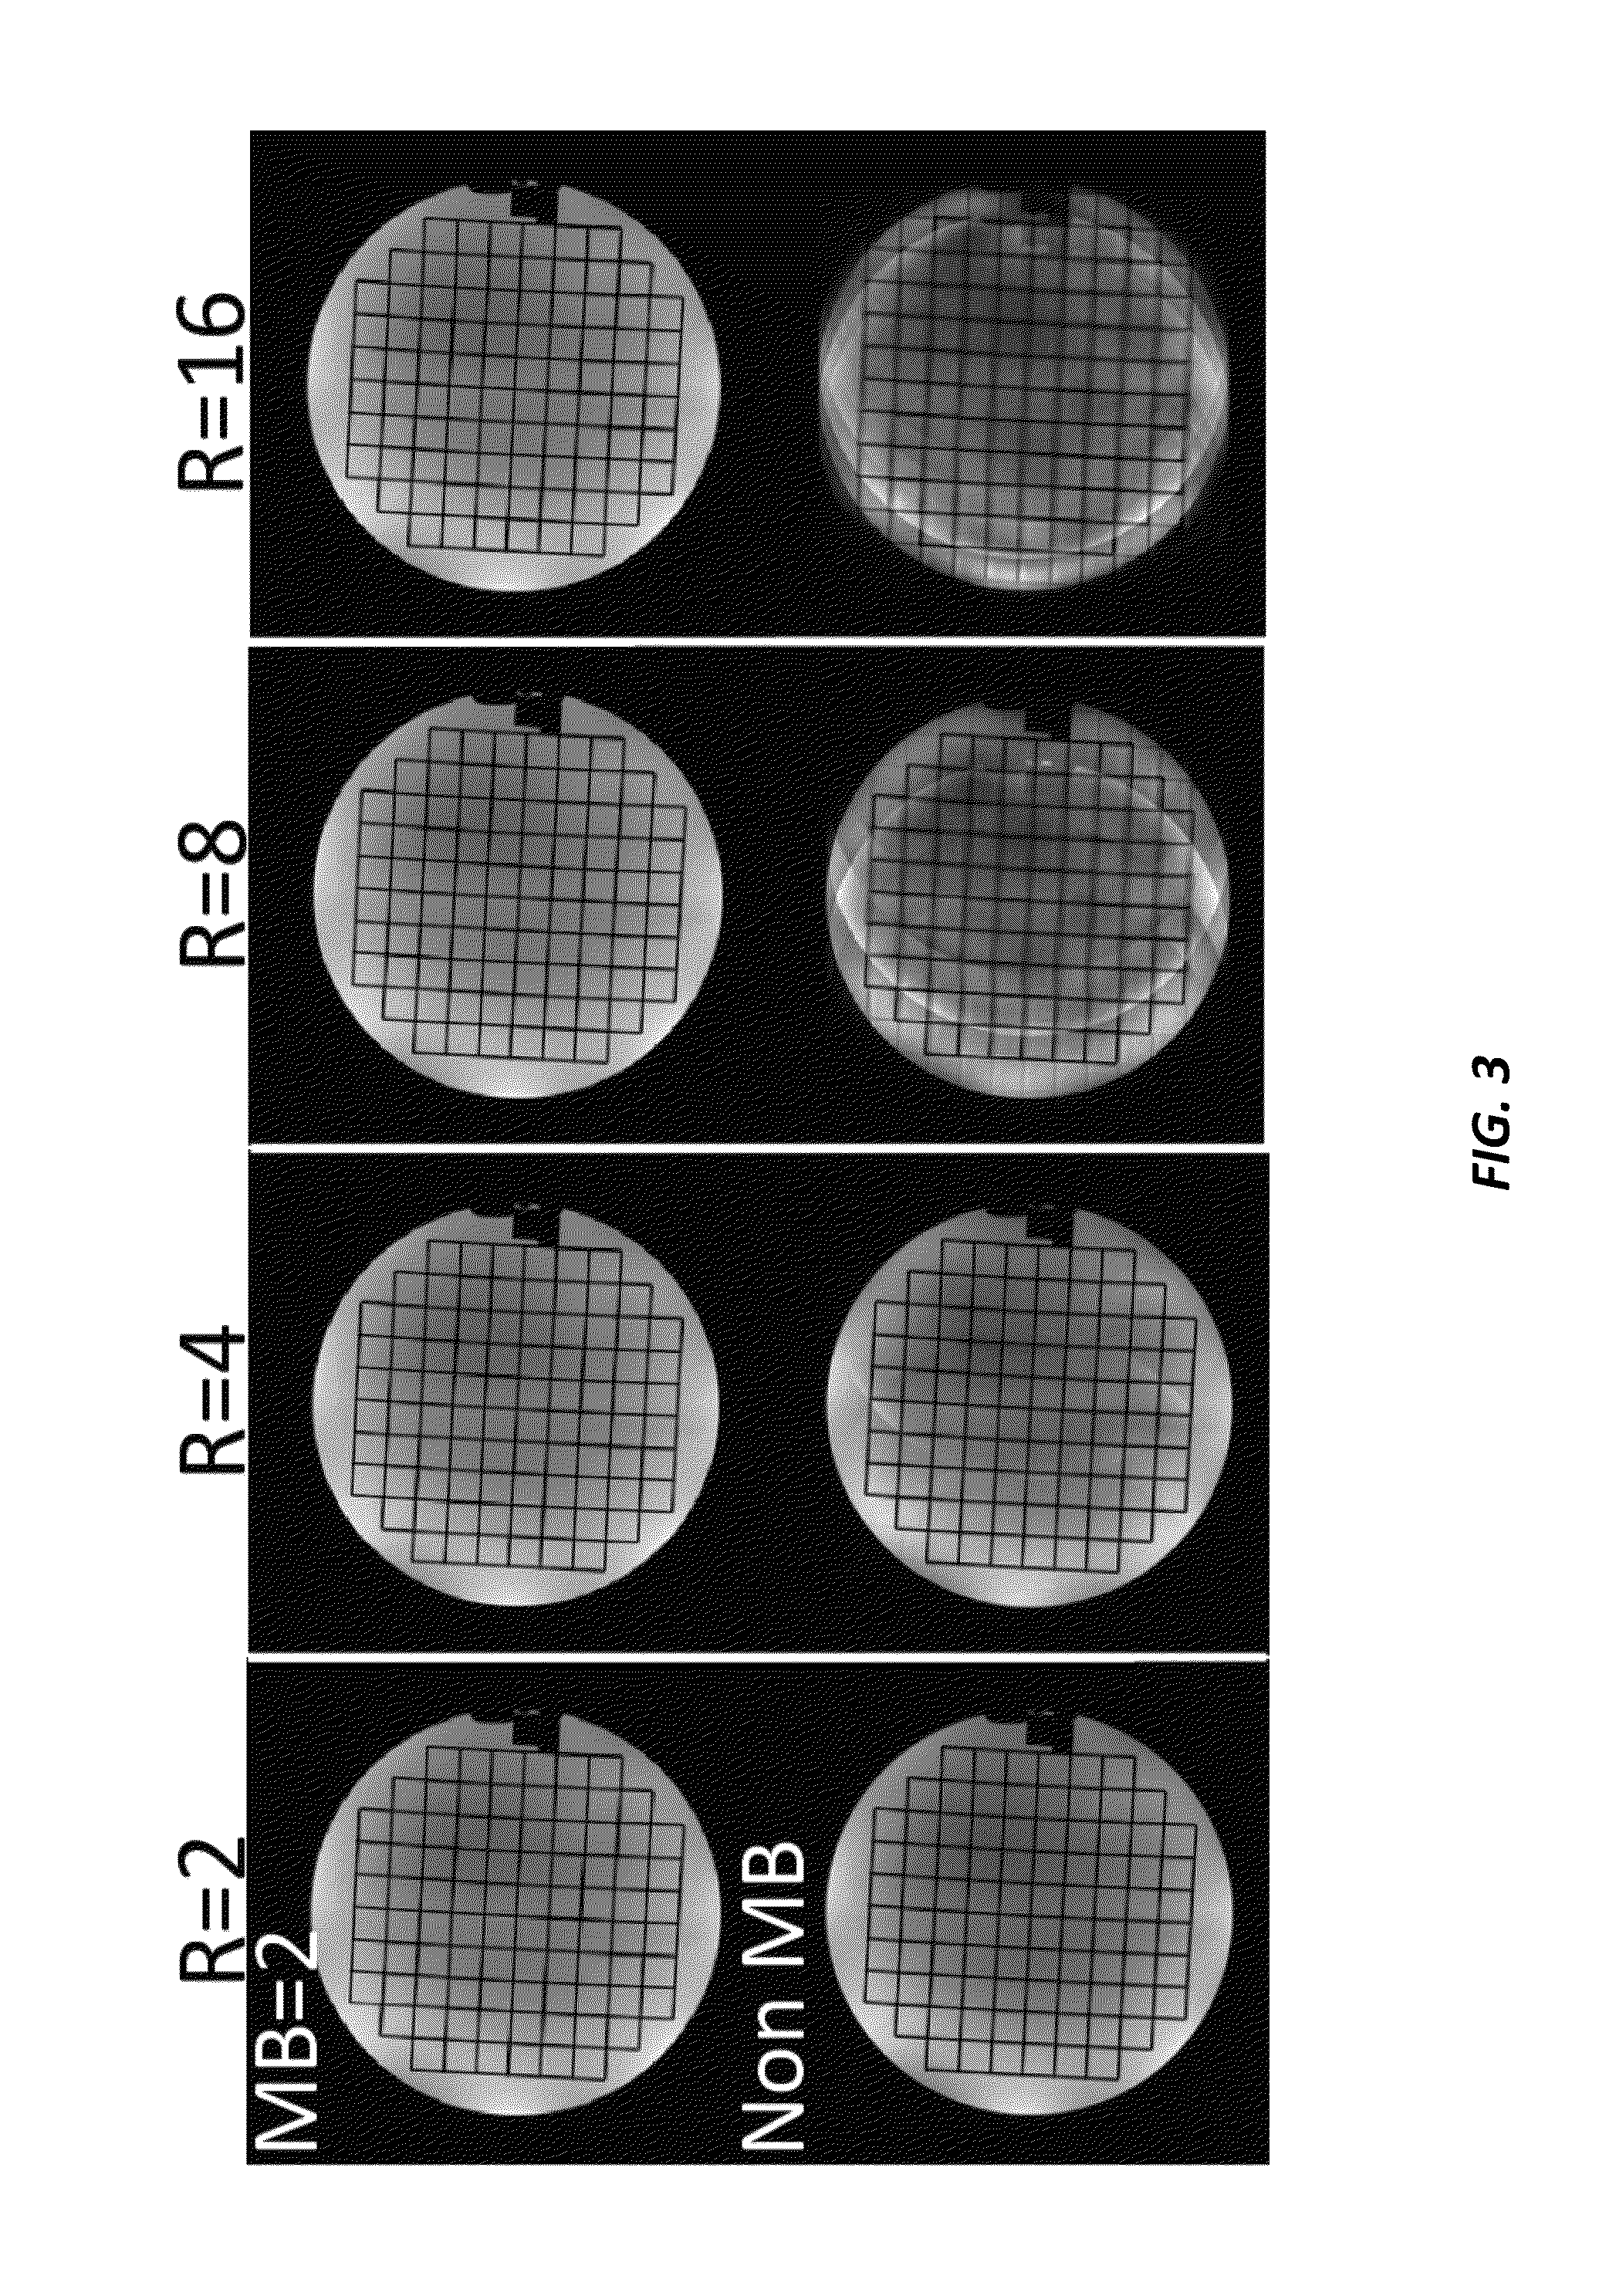 High Resolution Magnetic Resonance Imaging with Reduced Distortion Based on Reduced-Field-of-View and Generalized Parallel Imaging